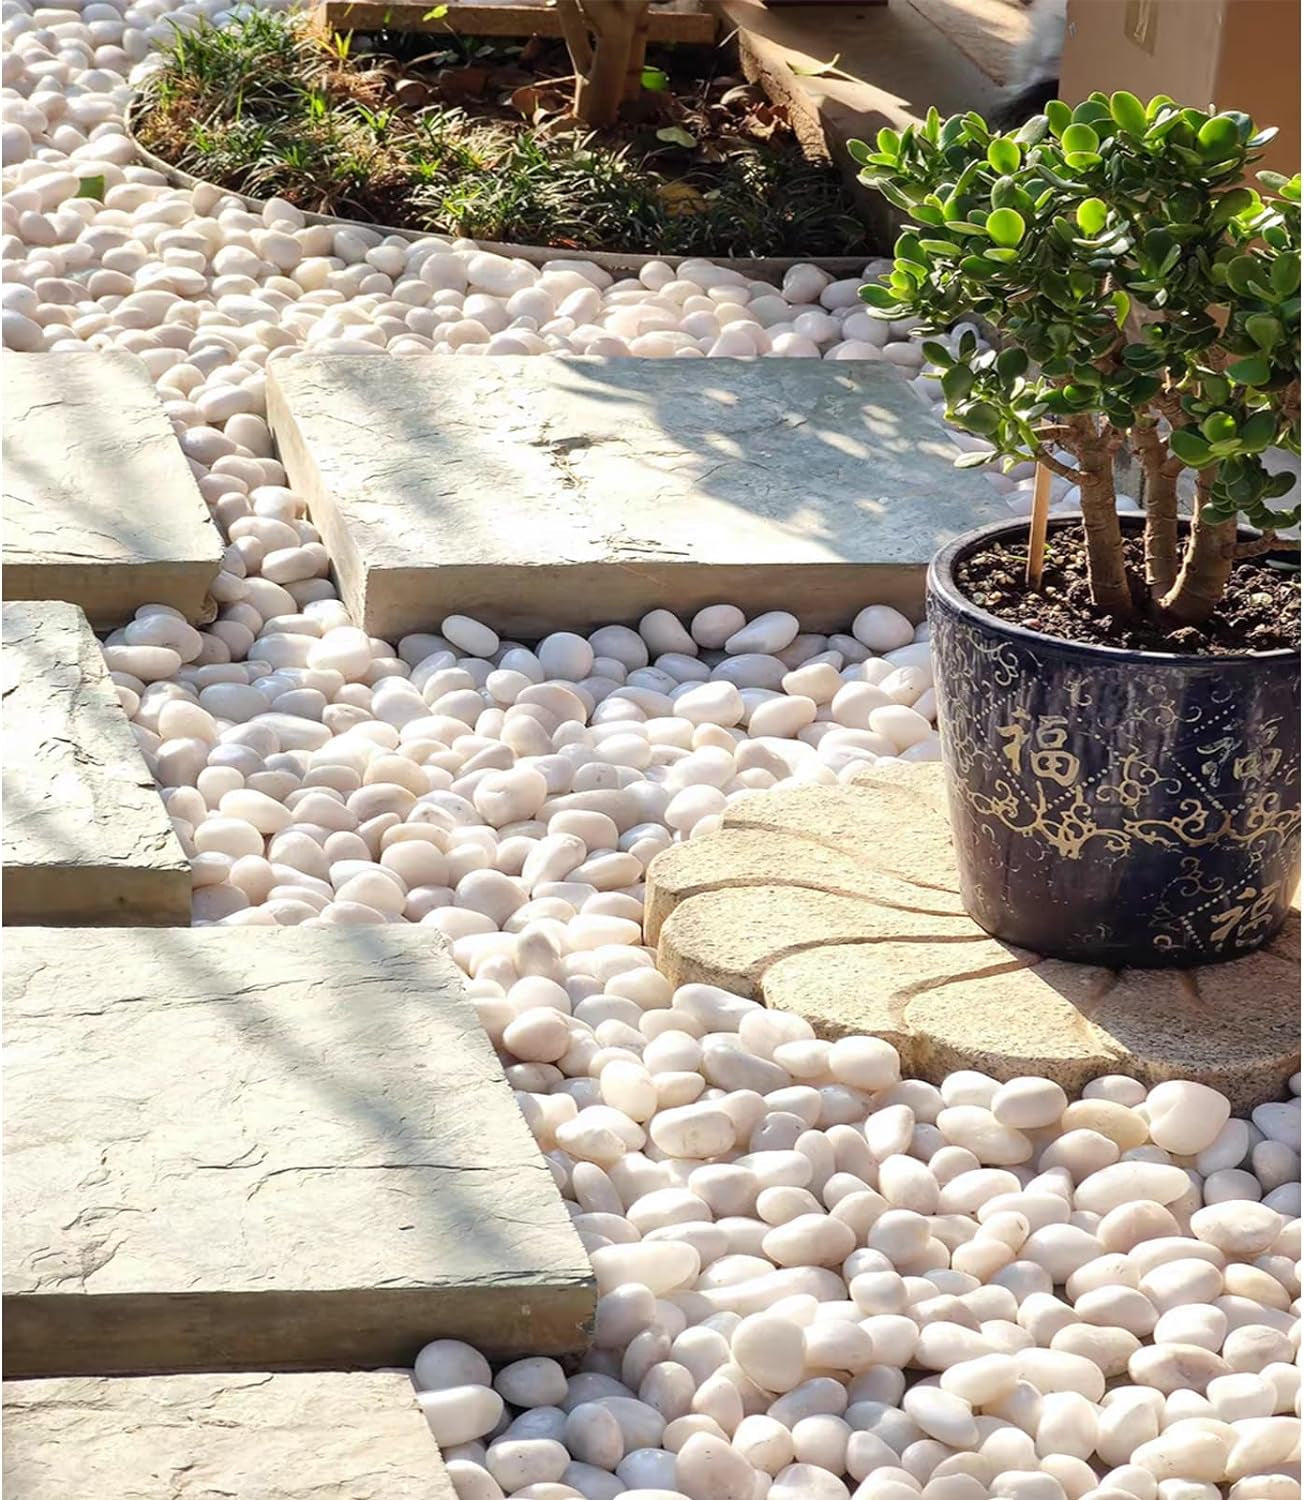 5 Lbs White River Rocks, Polished Pebbles for Indoor Plants, 1-2 Inch Decorative White Stones for Plants Vase Aquarium Fish Tank and Outdoor Garden Landscaping Rocks